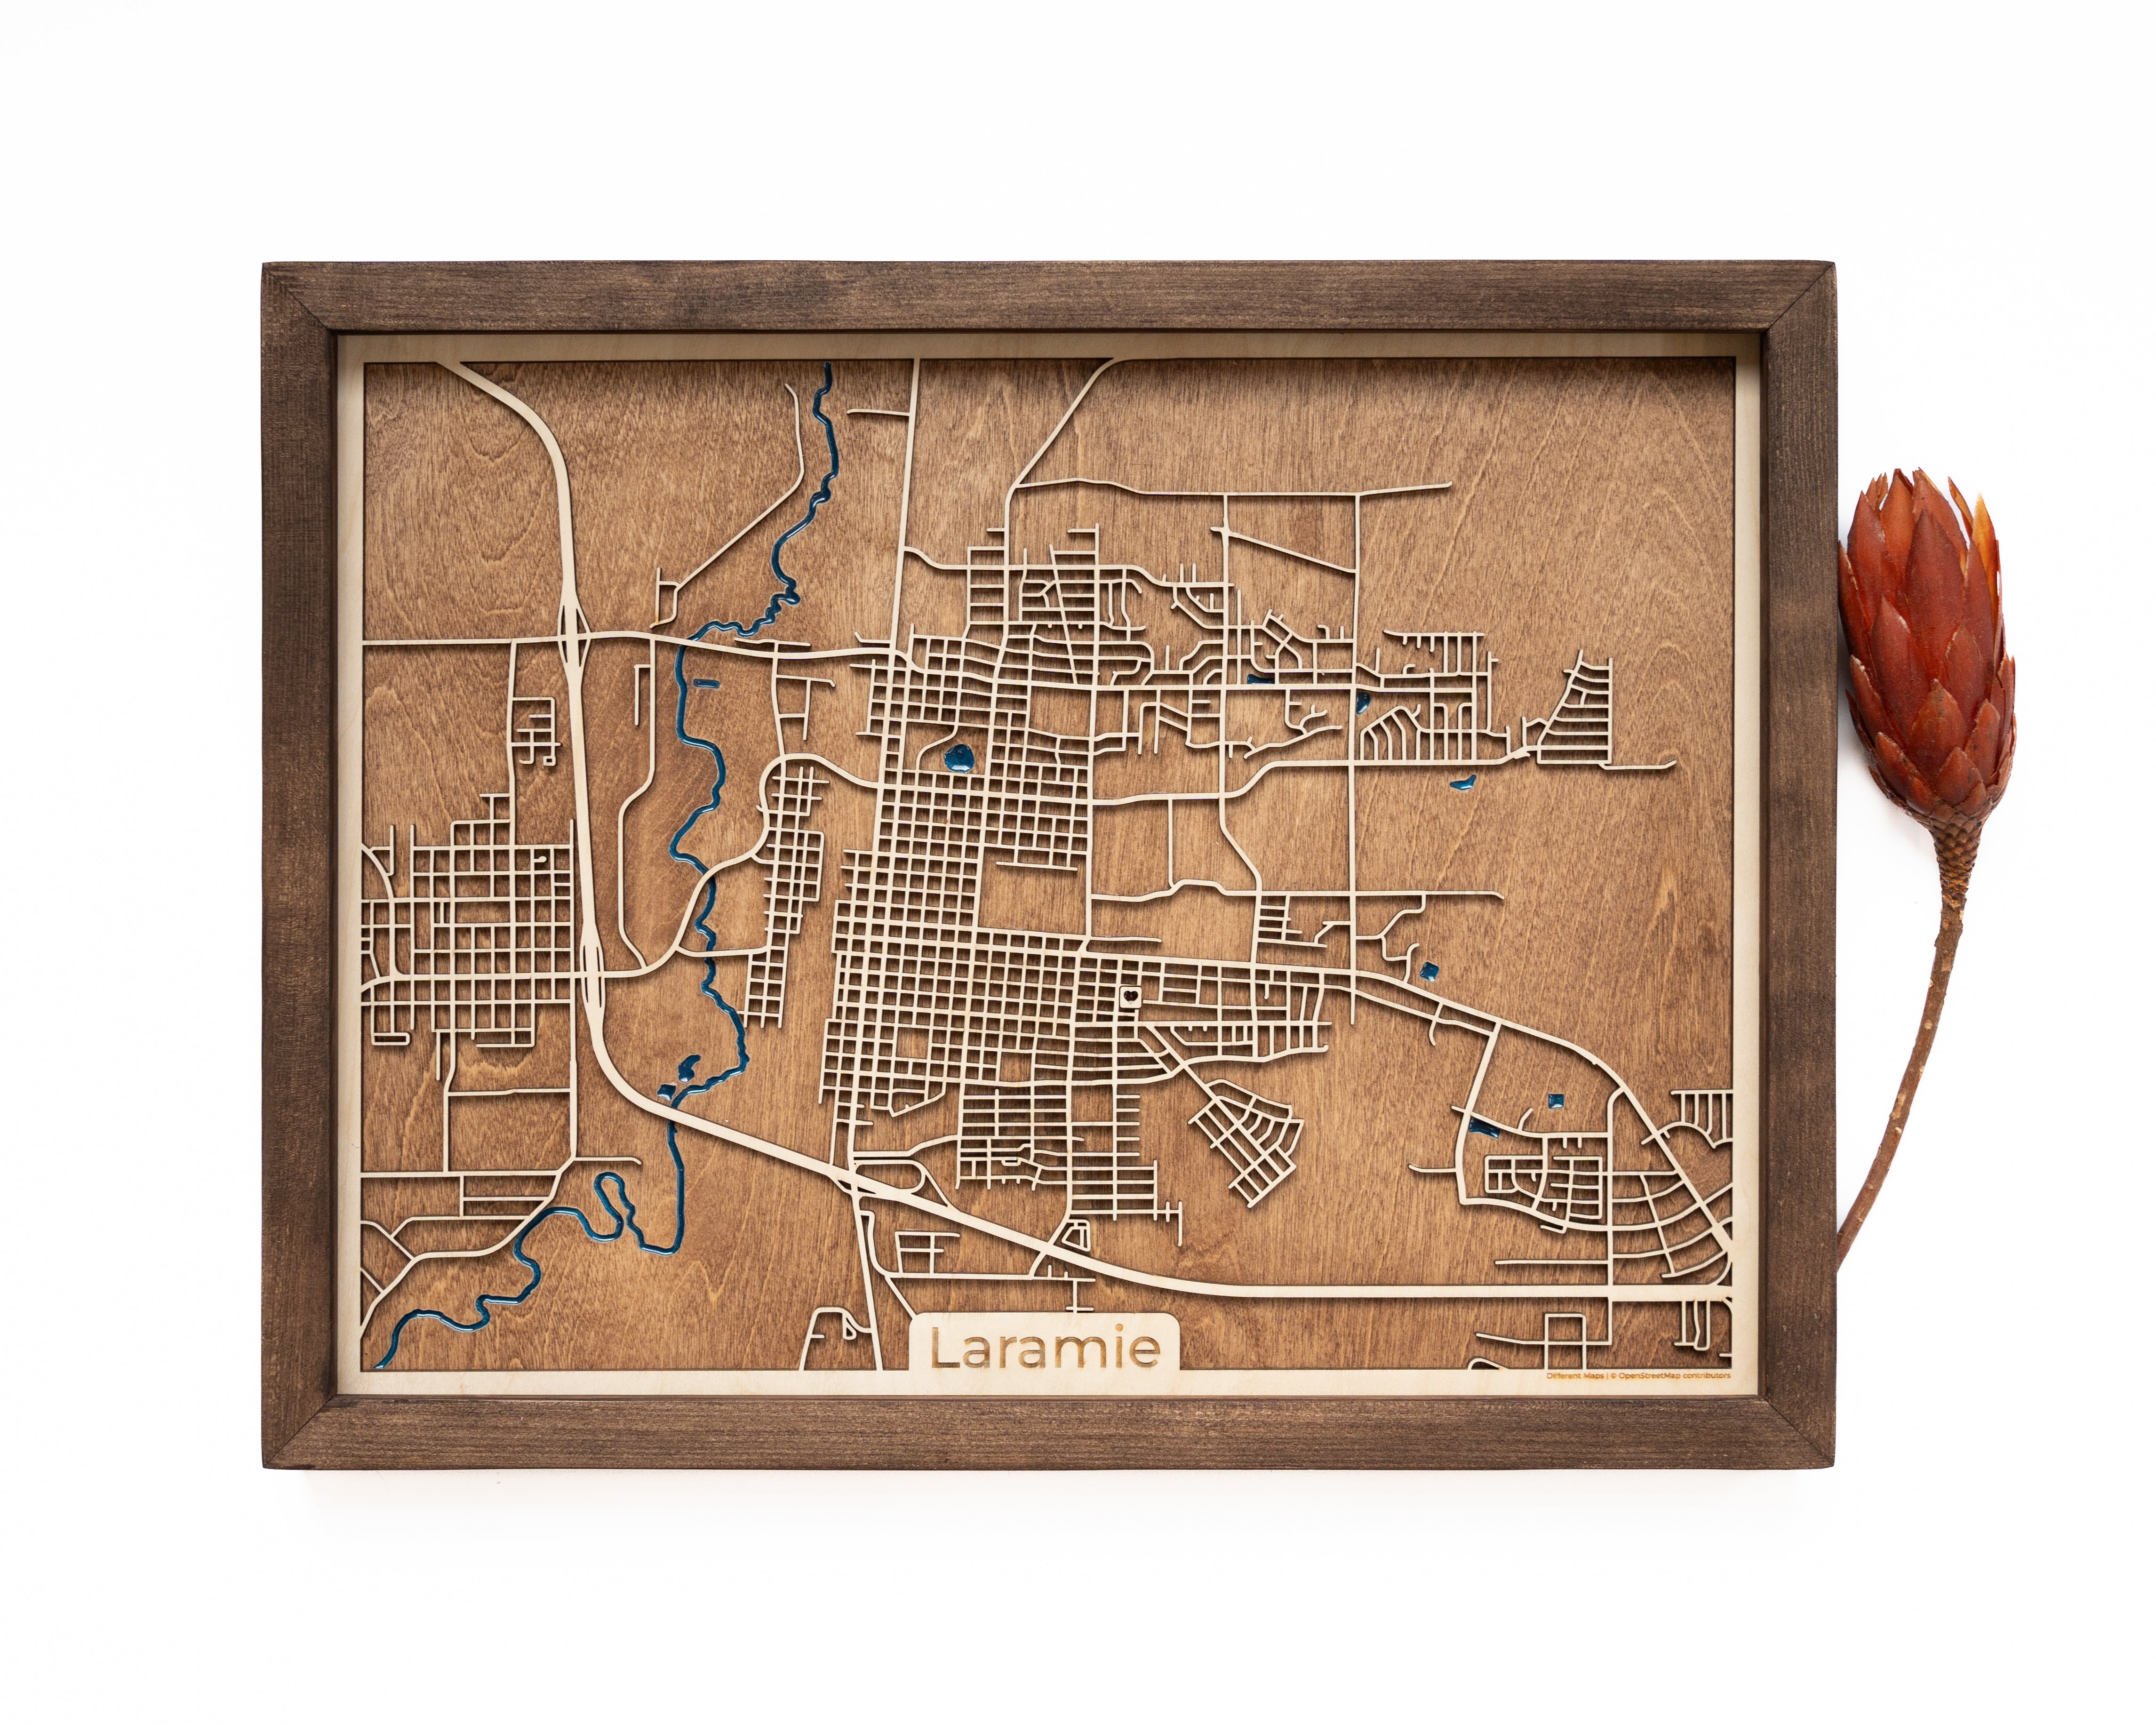 Discover the intricate details of Laramie with the unique gift. This specialized map showcases the streets, landmarks, and attractions of this vibrant city.